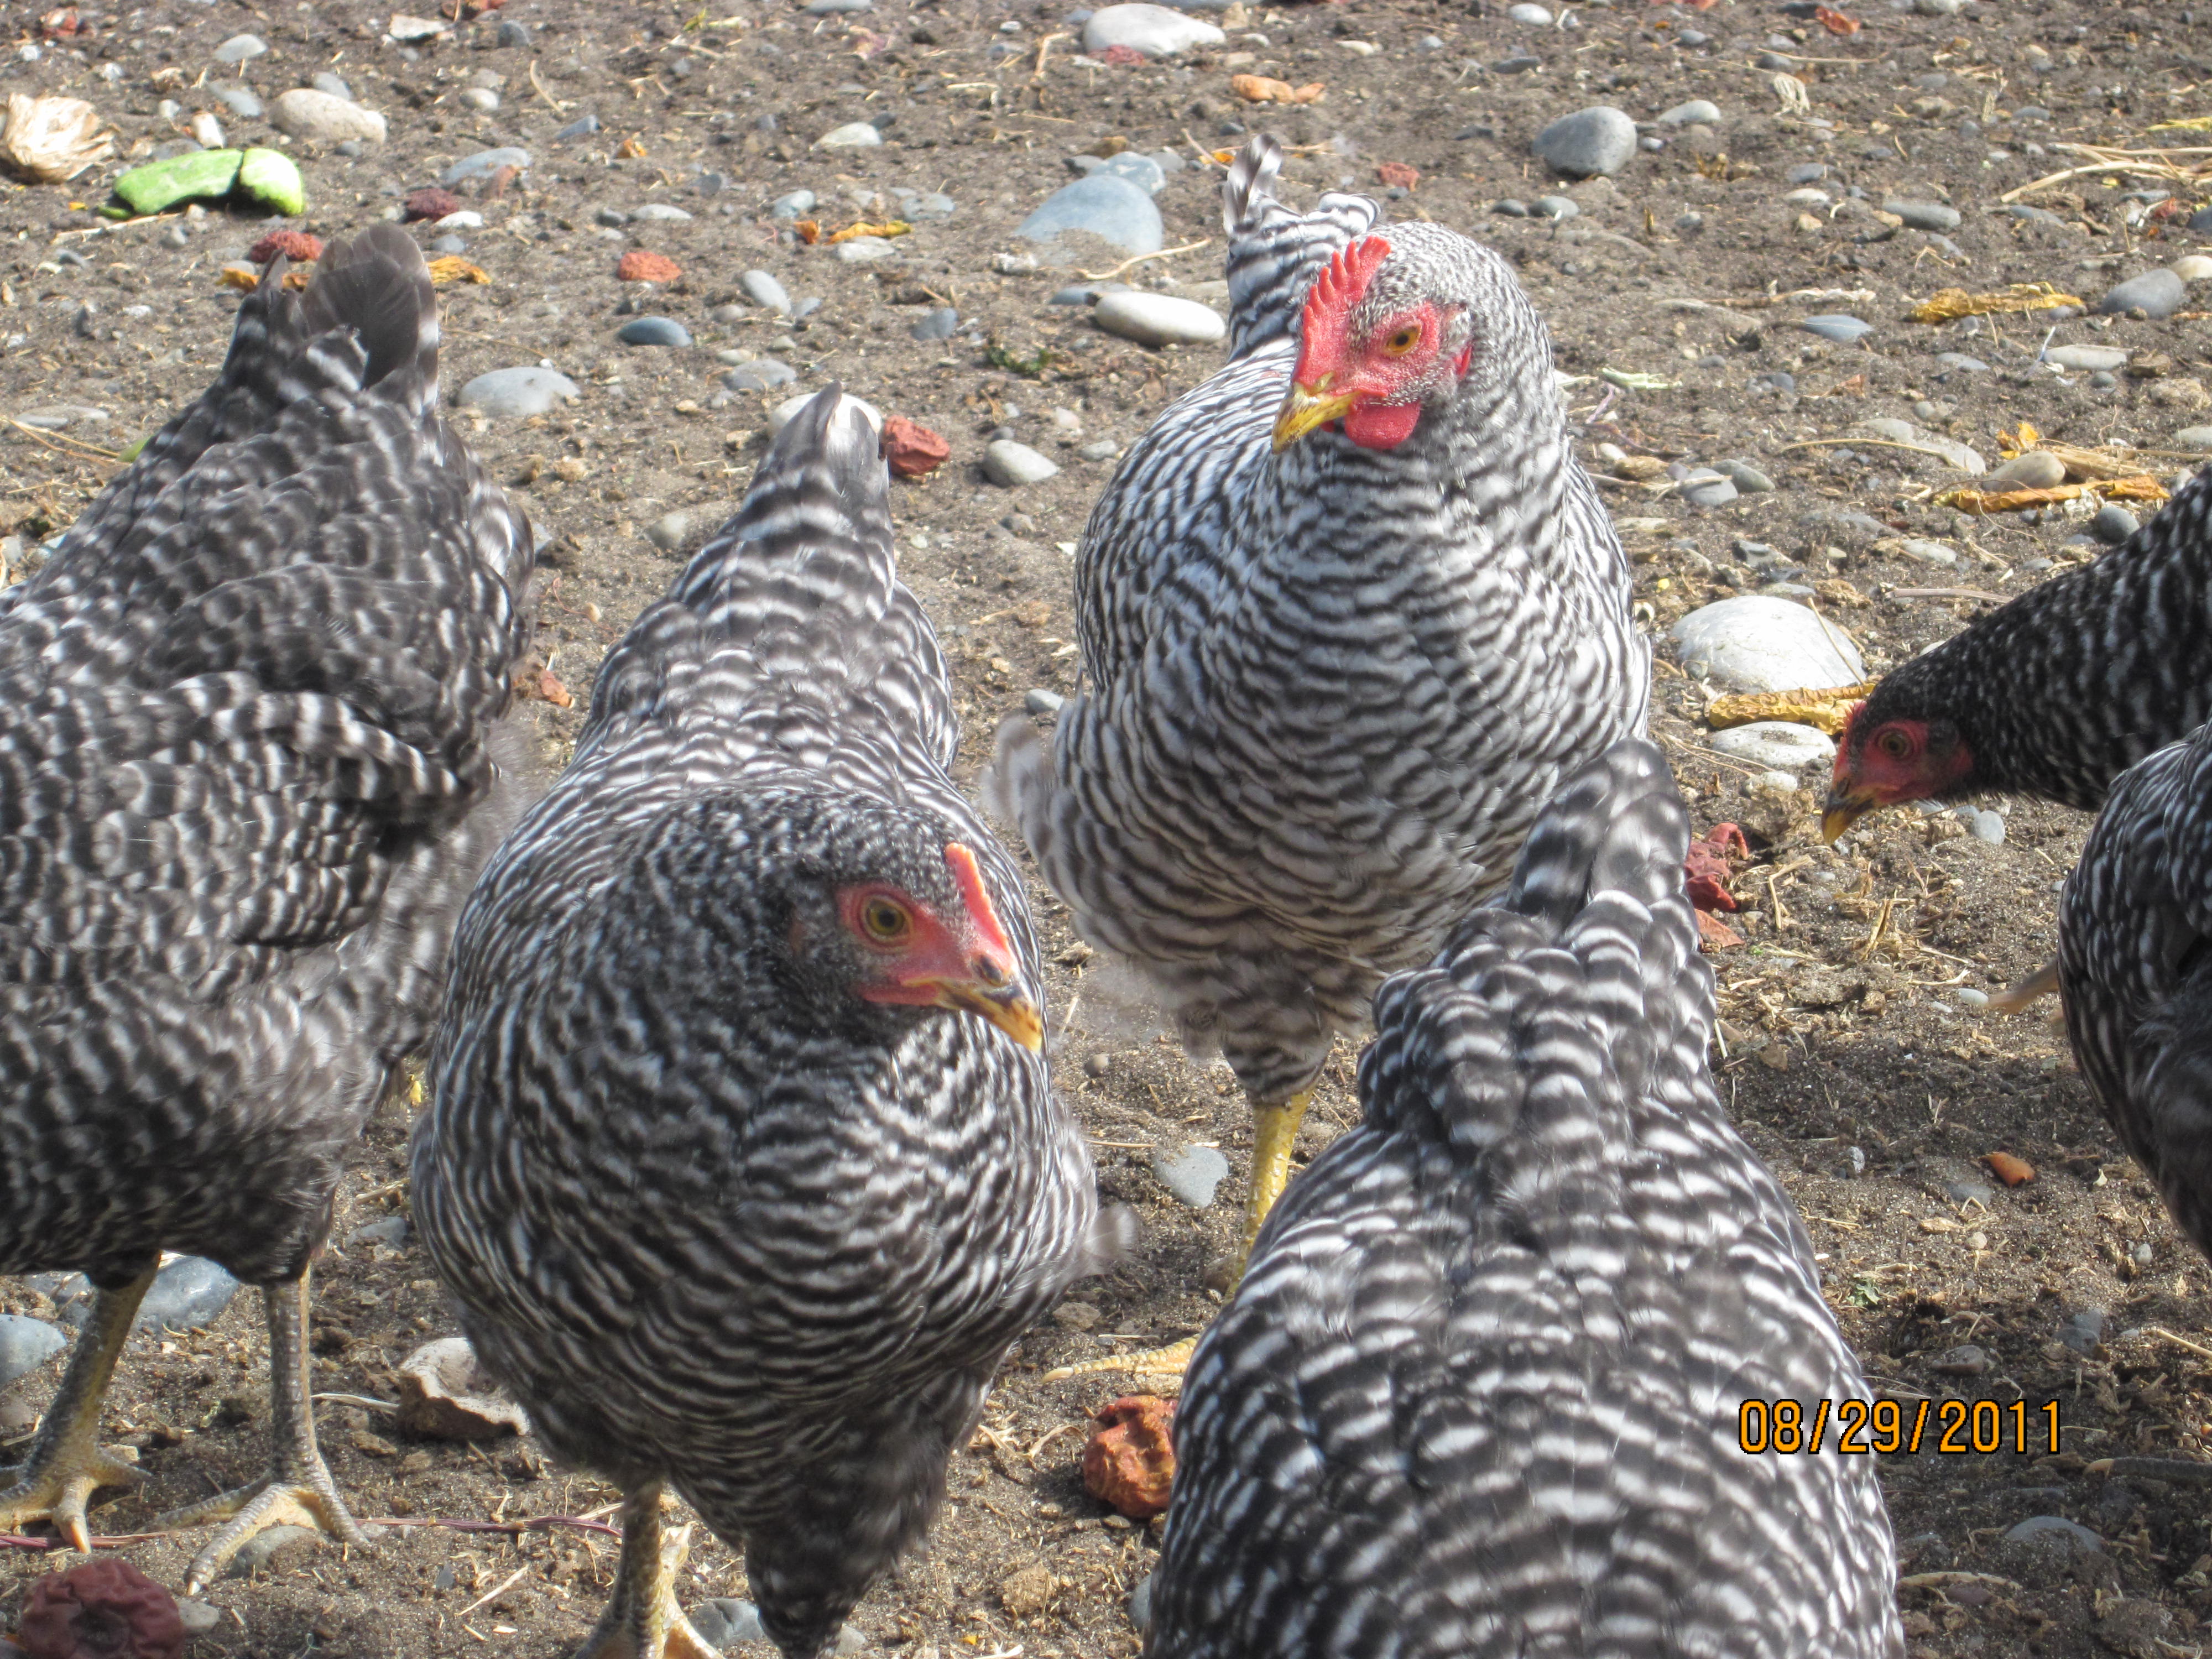 Our Barred Rock ladies